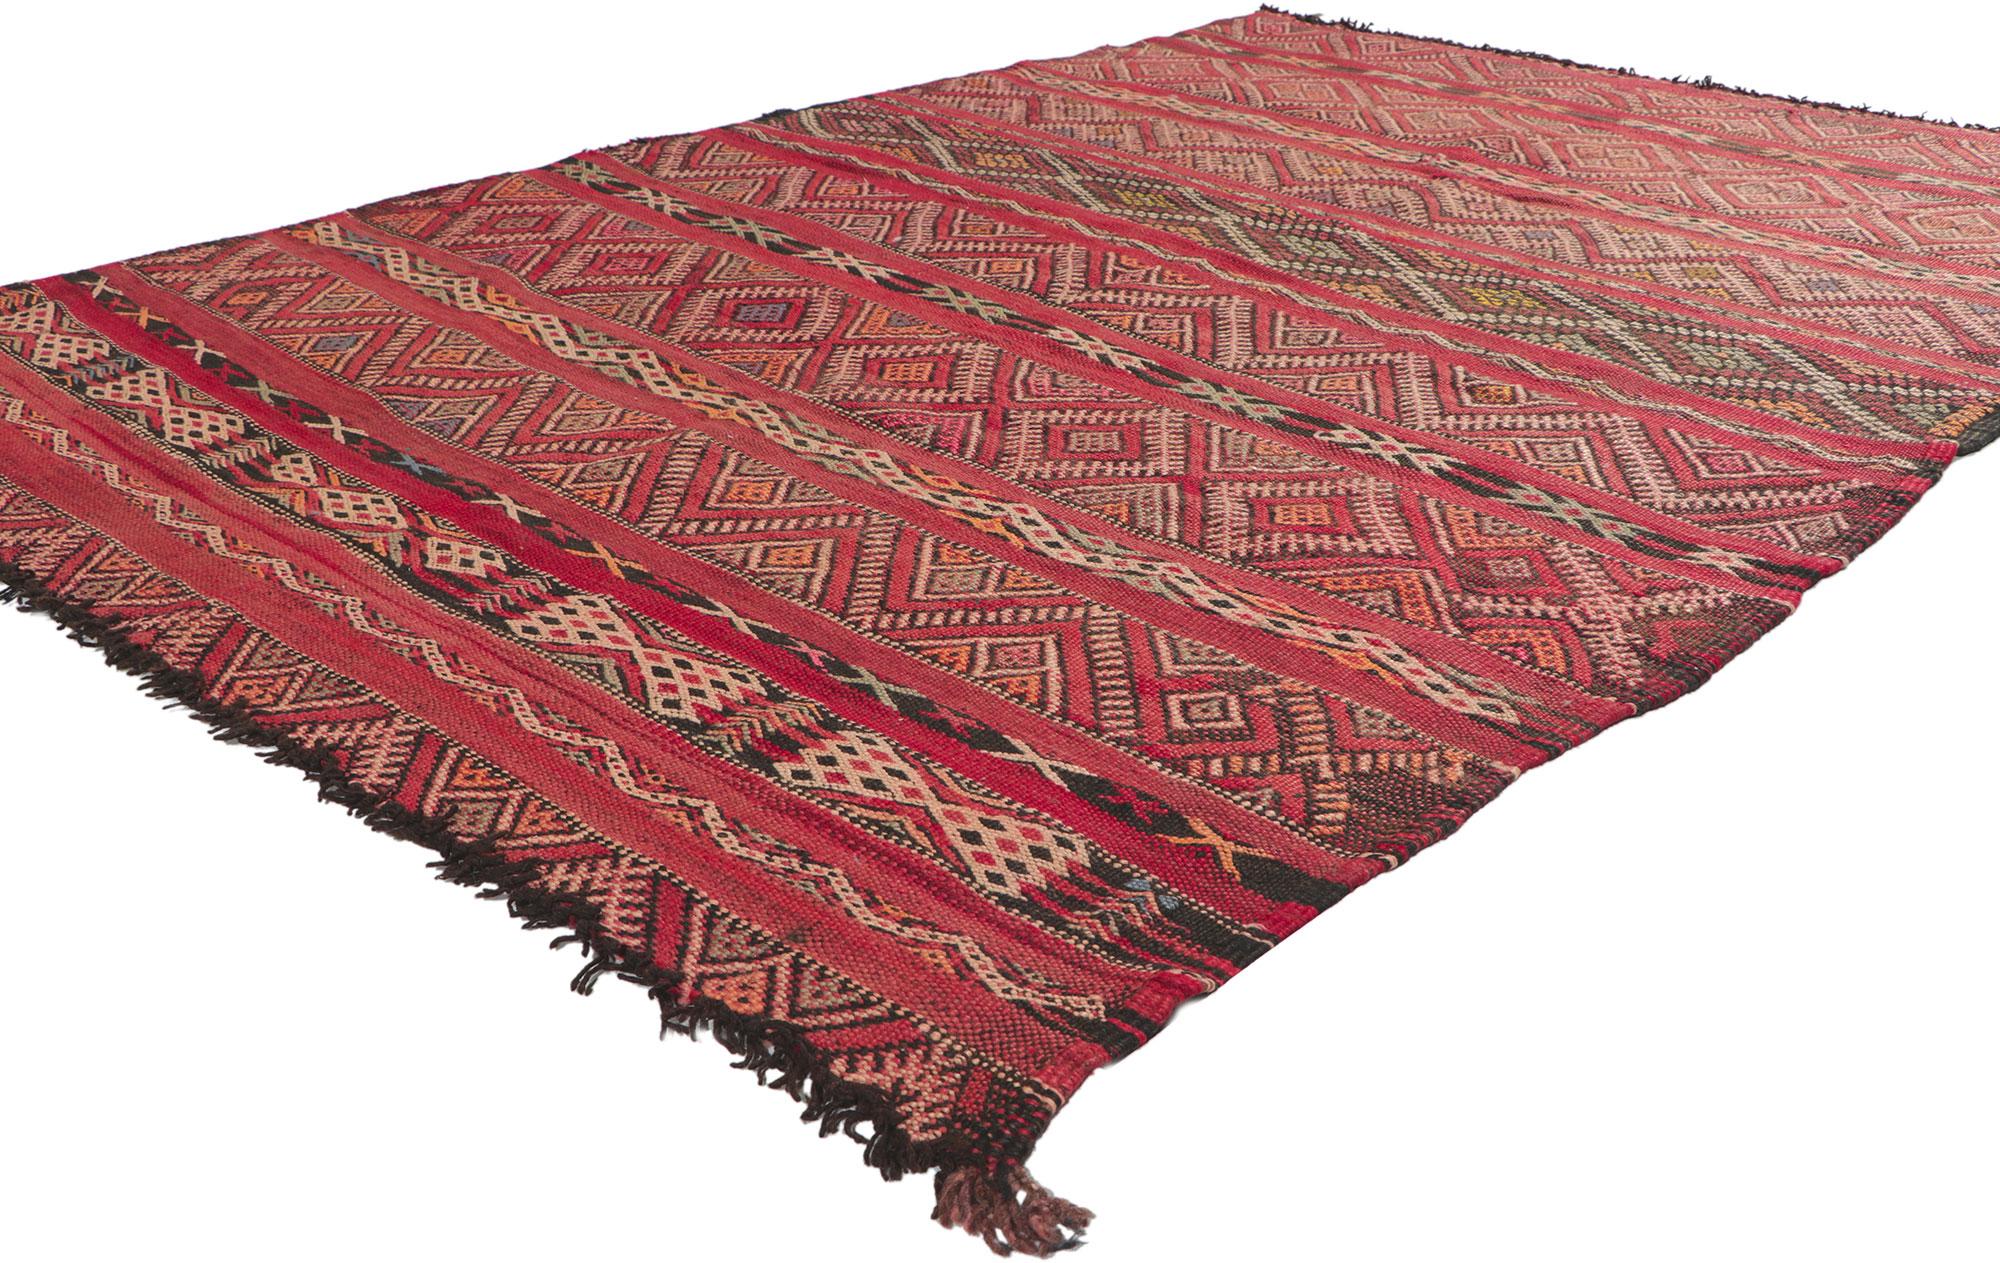 ?78397 Vintage Zemmour Moroccan Kilim rug, 05'03 x 07'09. ?Full of tiny details and tribal style, this hand-woven wool vintage Zemmour Berber Moroccan kilim rug is a captivating vision of woven beauty. The eye-catching geometric pattern woven into